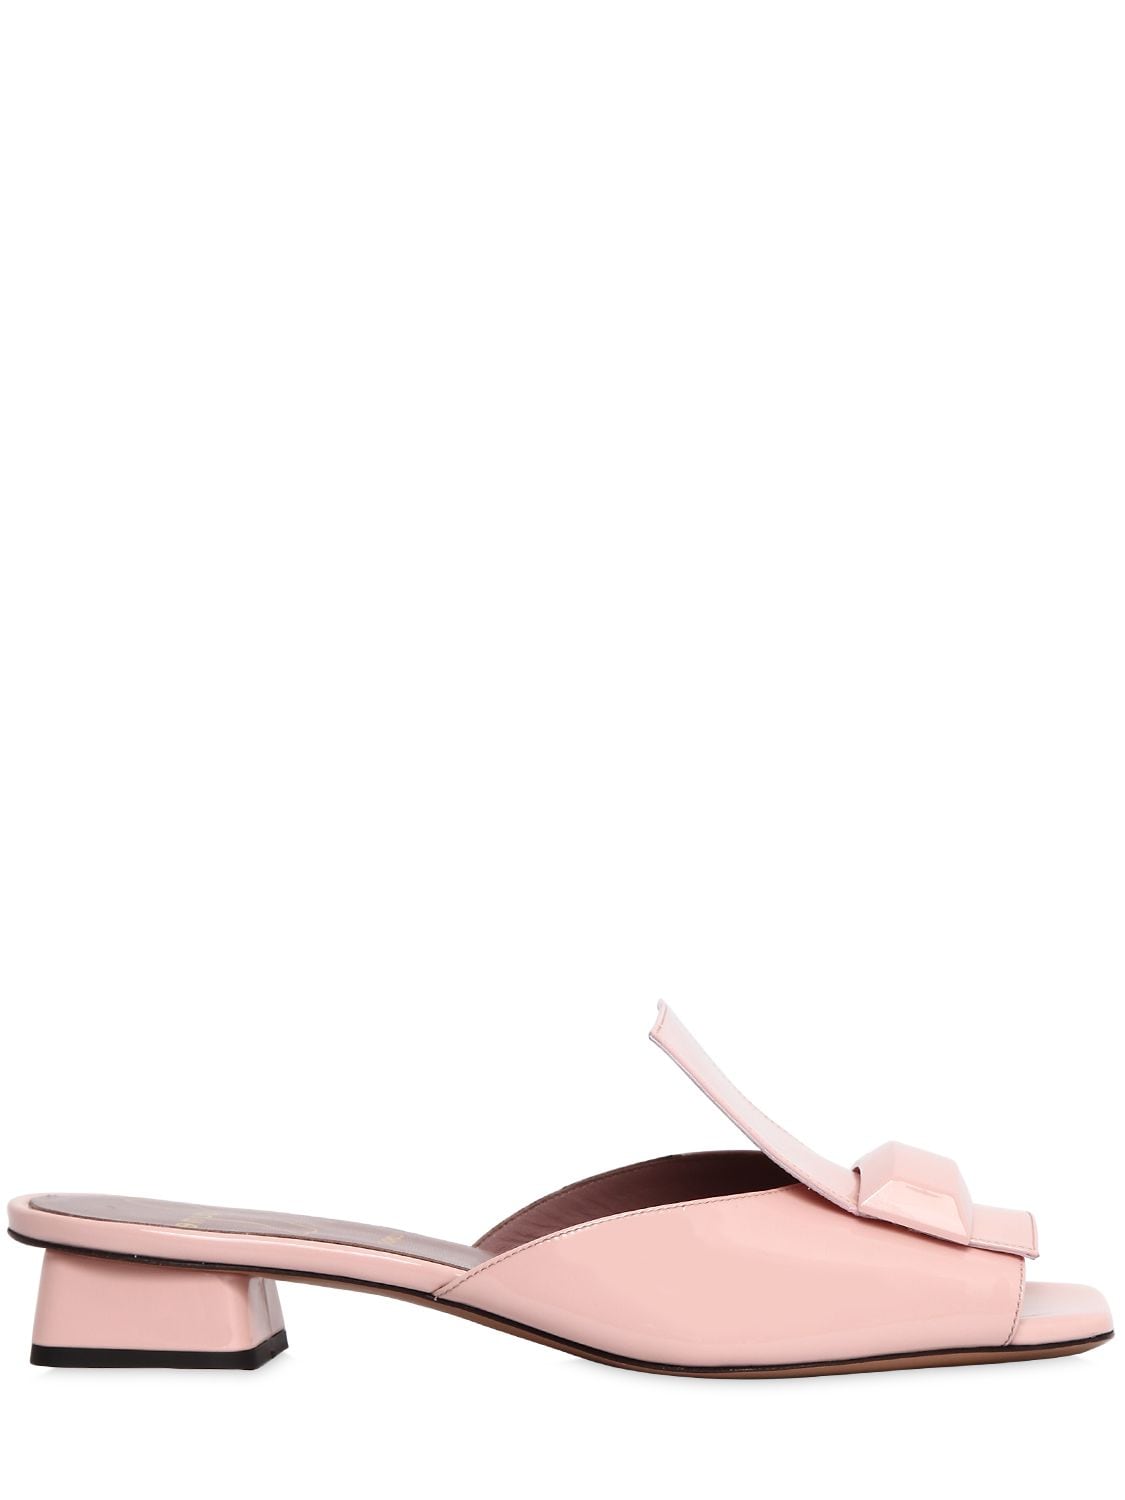 Rayne 30mm Patent Leather Sandals In Light Pink